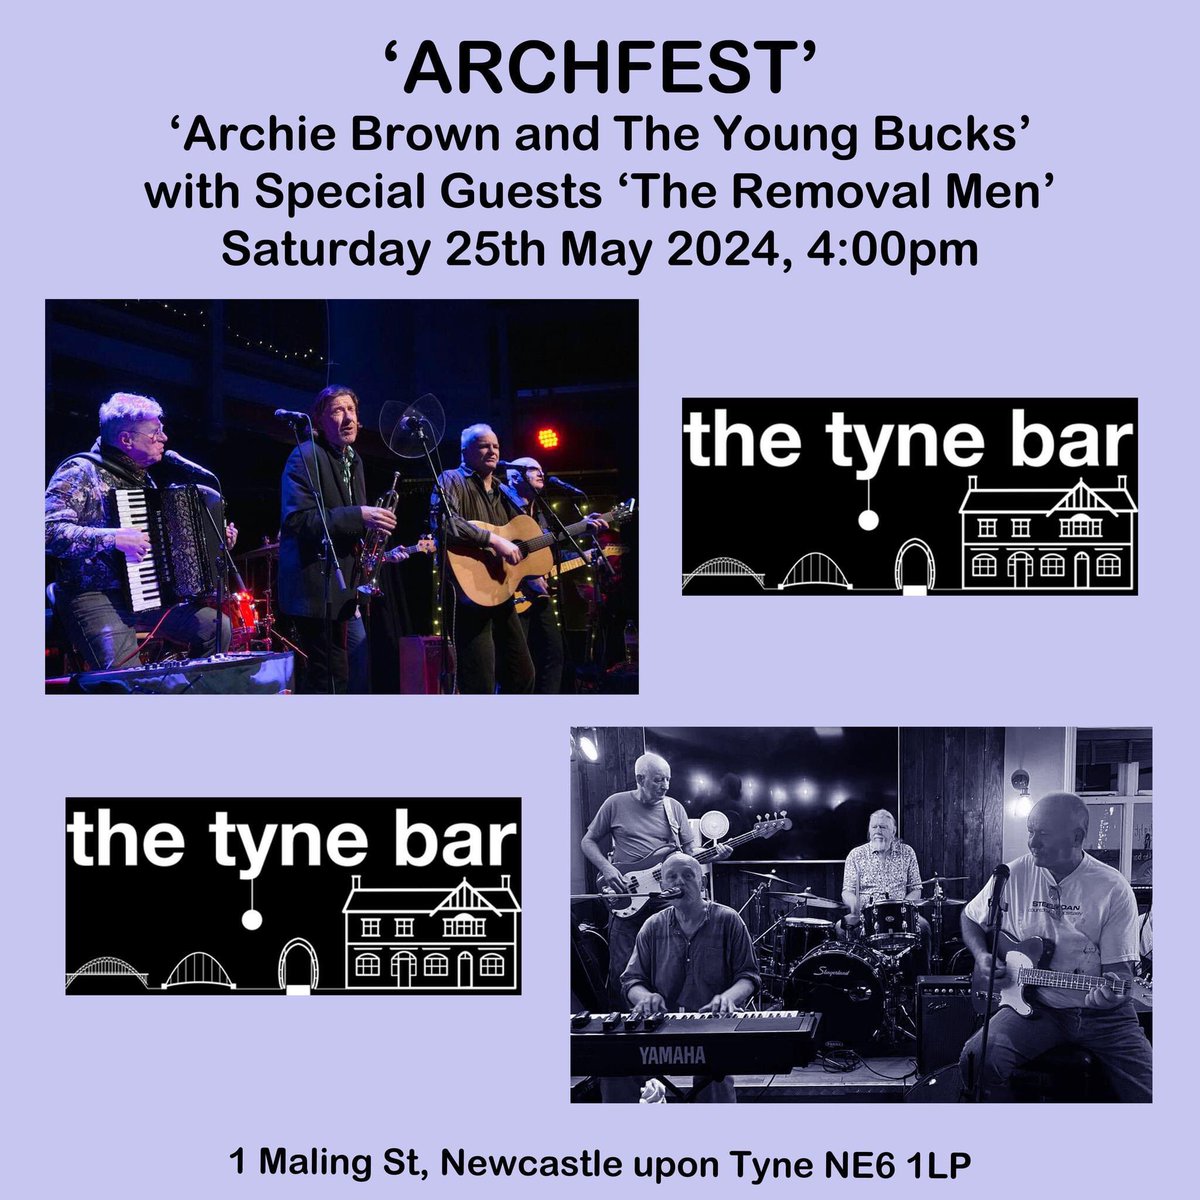 Saturday (May 25) Archfest: Archie Brown & the Young Bucks with special guests The Removal Men. Sunday (May 26) The Boneshakers with their trademark foot tappin’ lively roadhouse blues. Bank Holiday Monday (May 27) Groovetrain on our beer garden stage. All free, 4pm starts